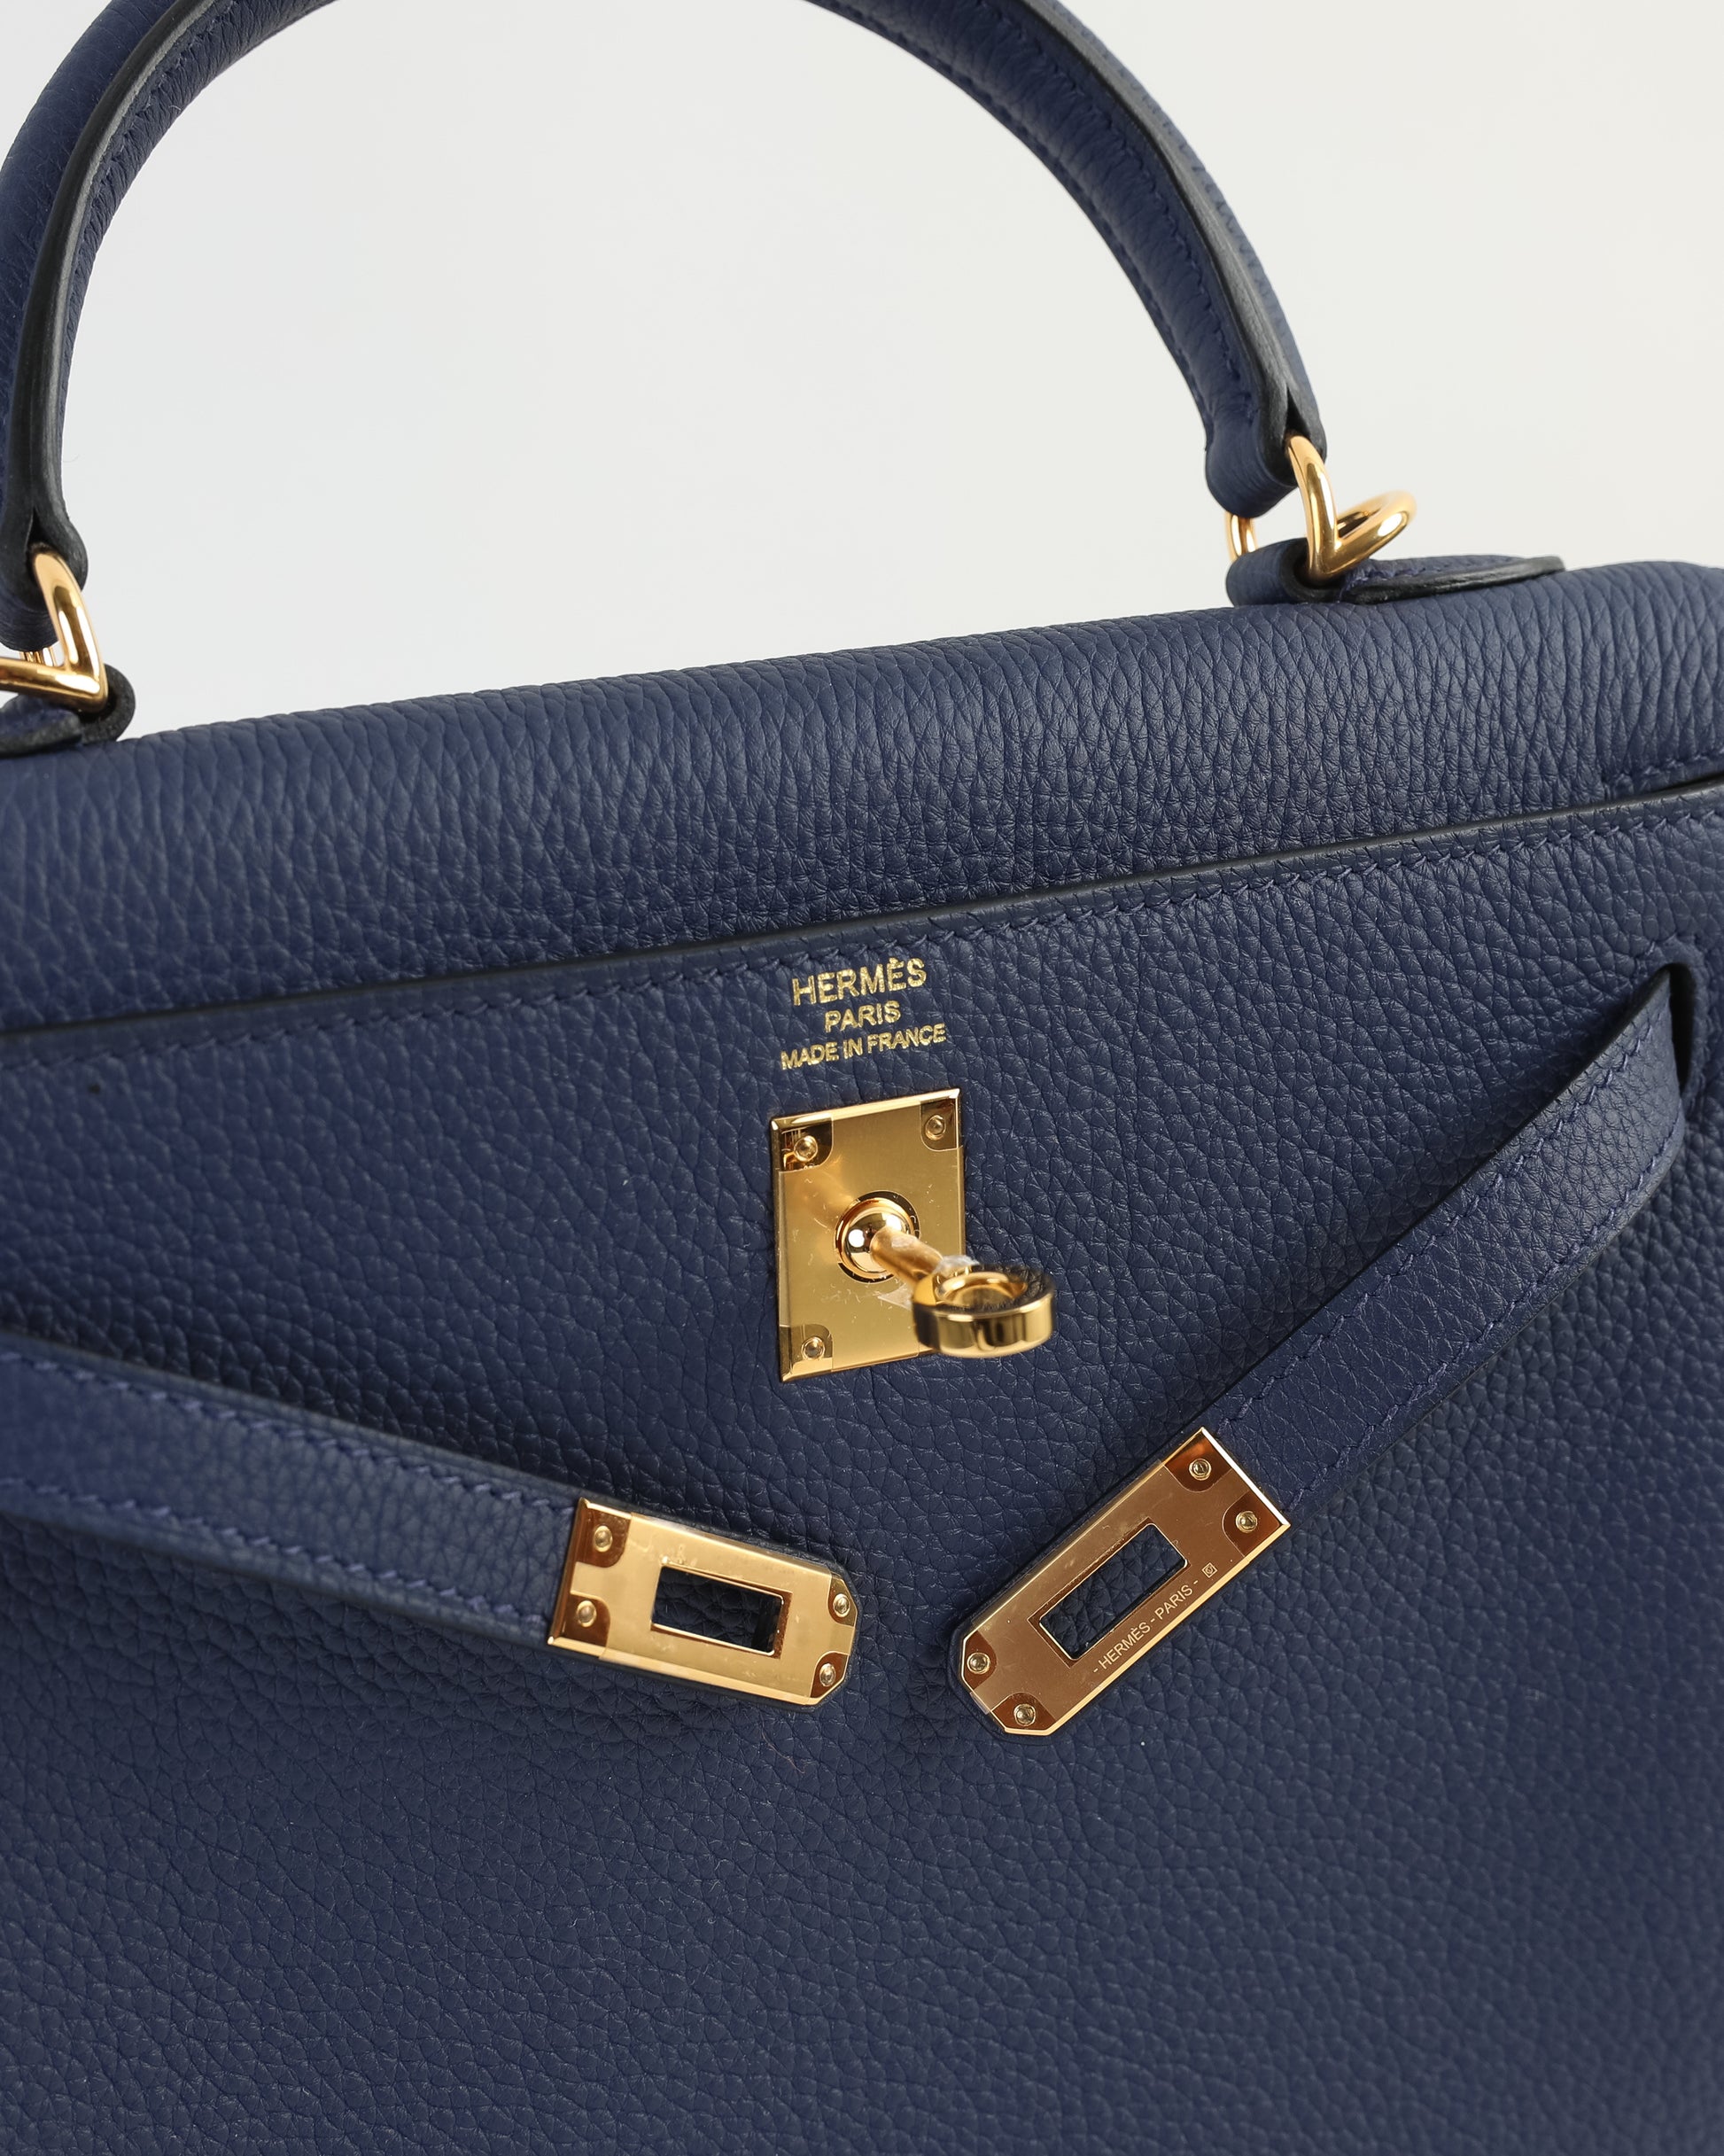 Kelly 25 Bleu Nuit in Togo Leather with Gold Hardware – Diamonds